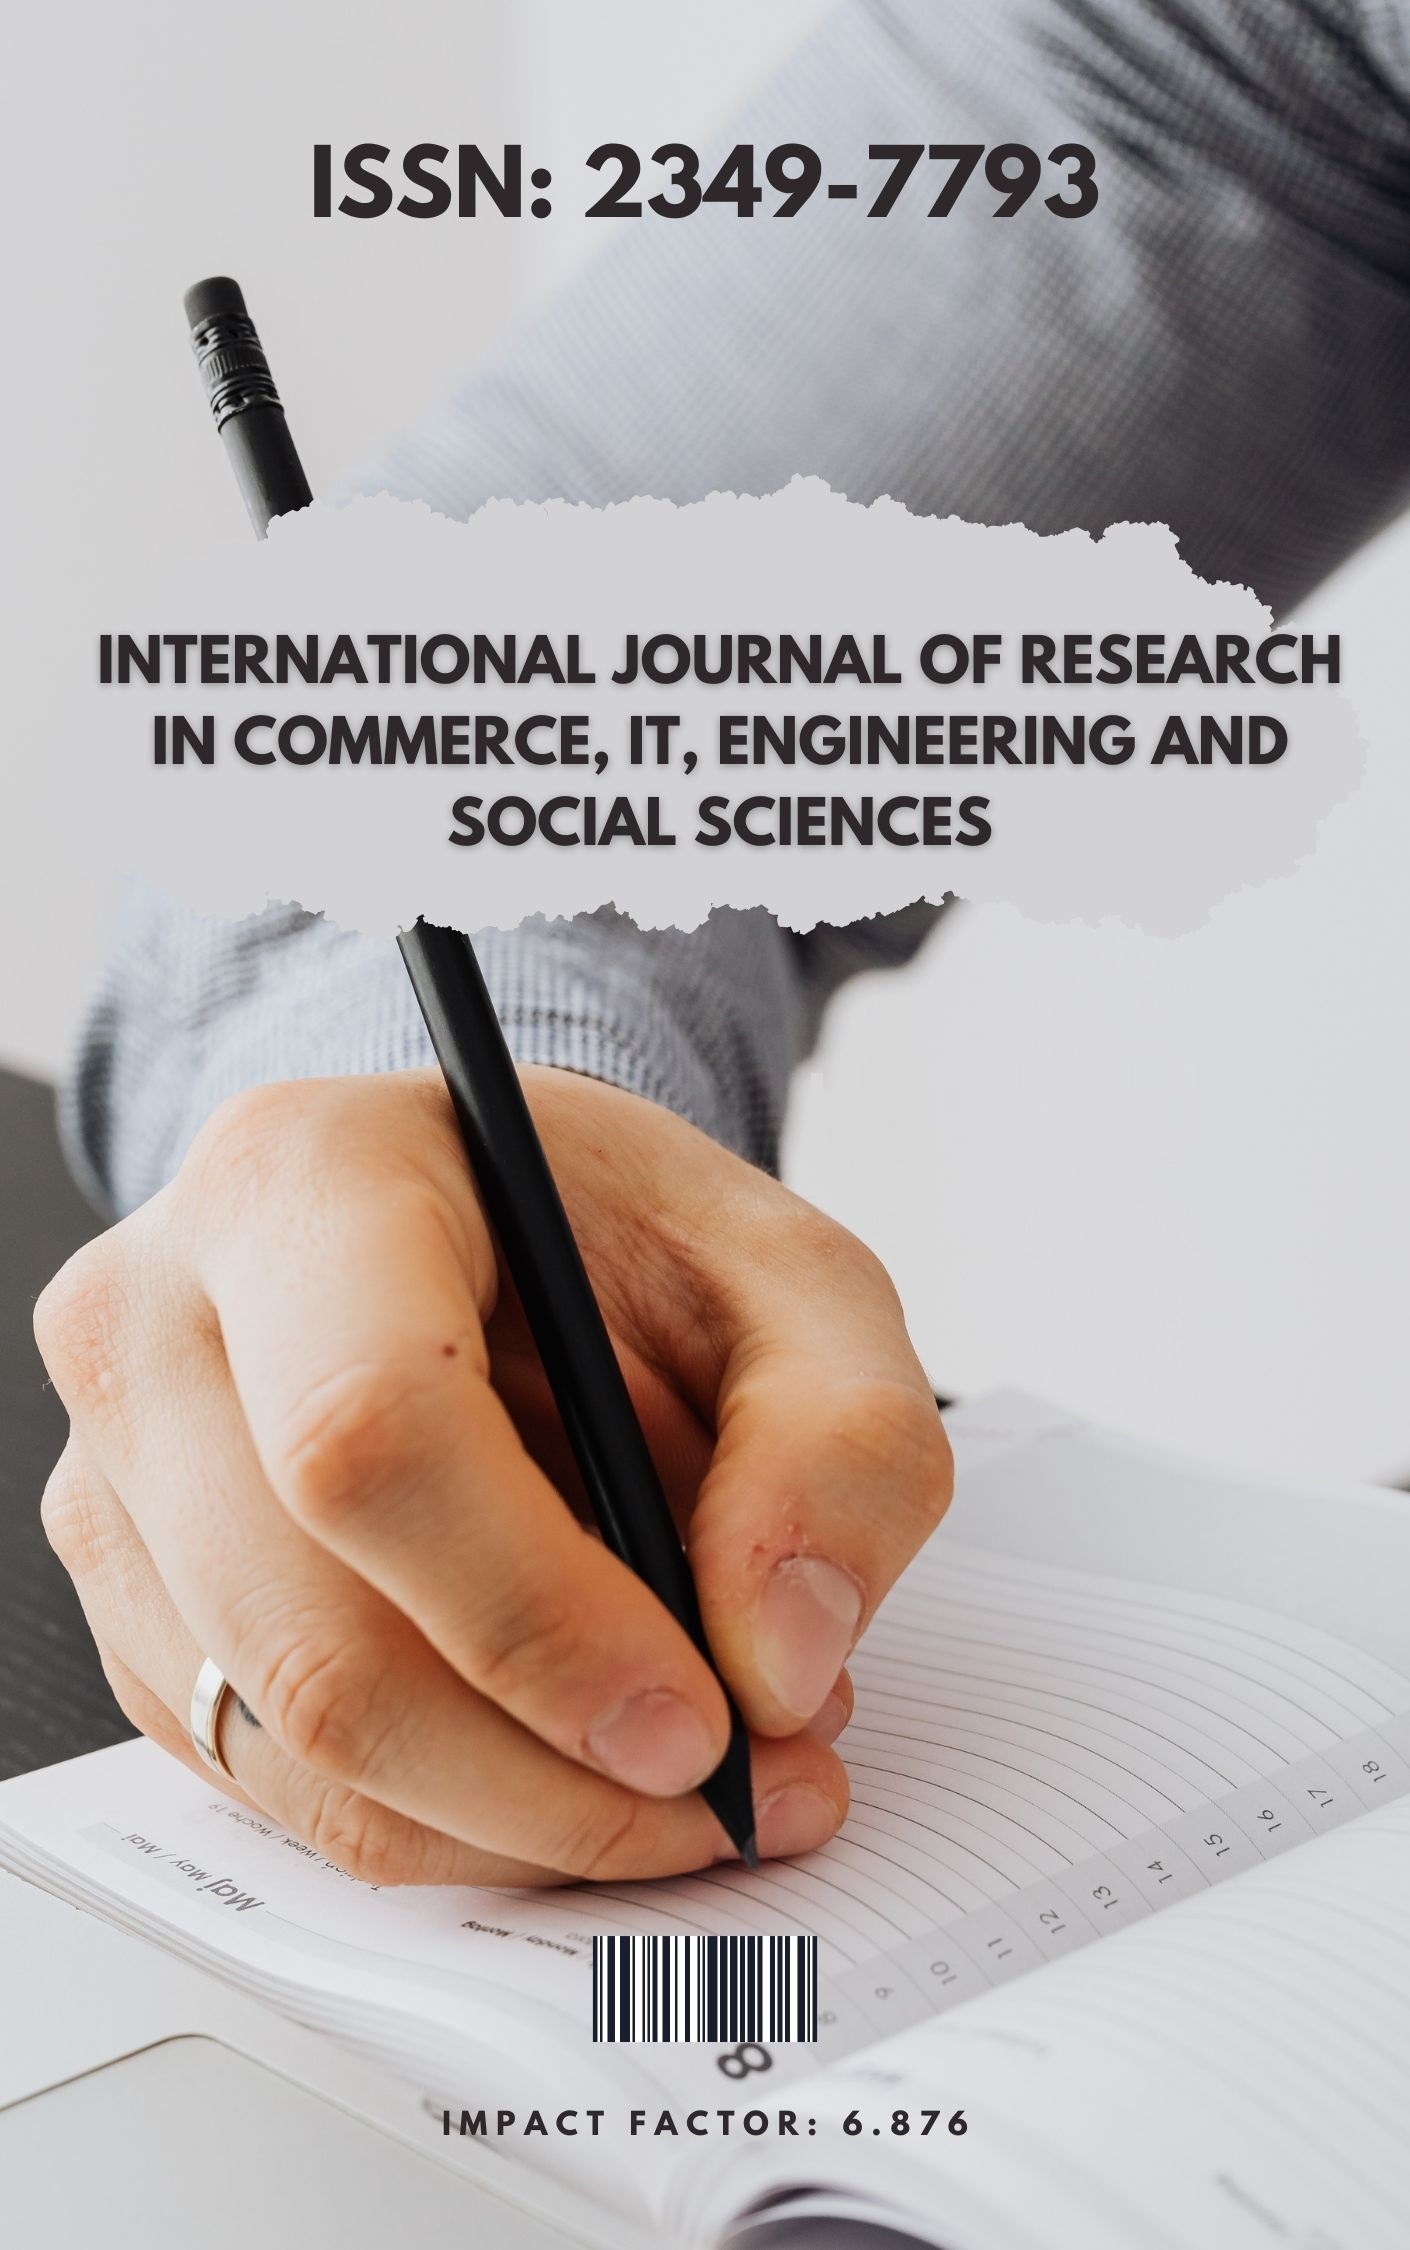 					View Vol. 15 No. 10 (2021): International Journal of Research in Commerce, IT, Engineering, and Social Sciences
				